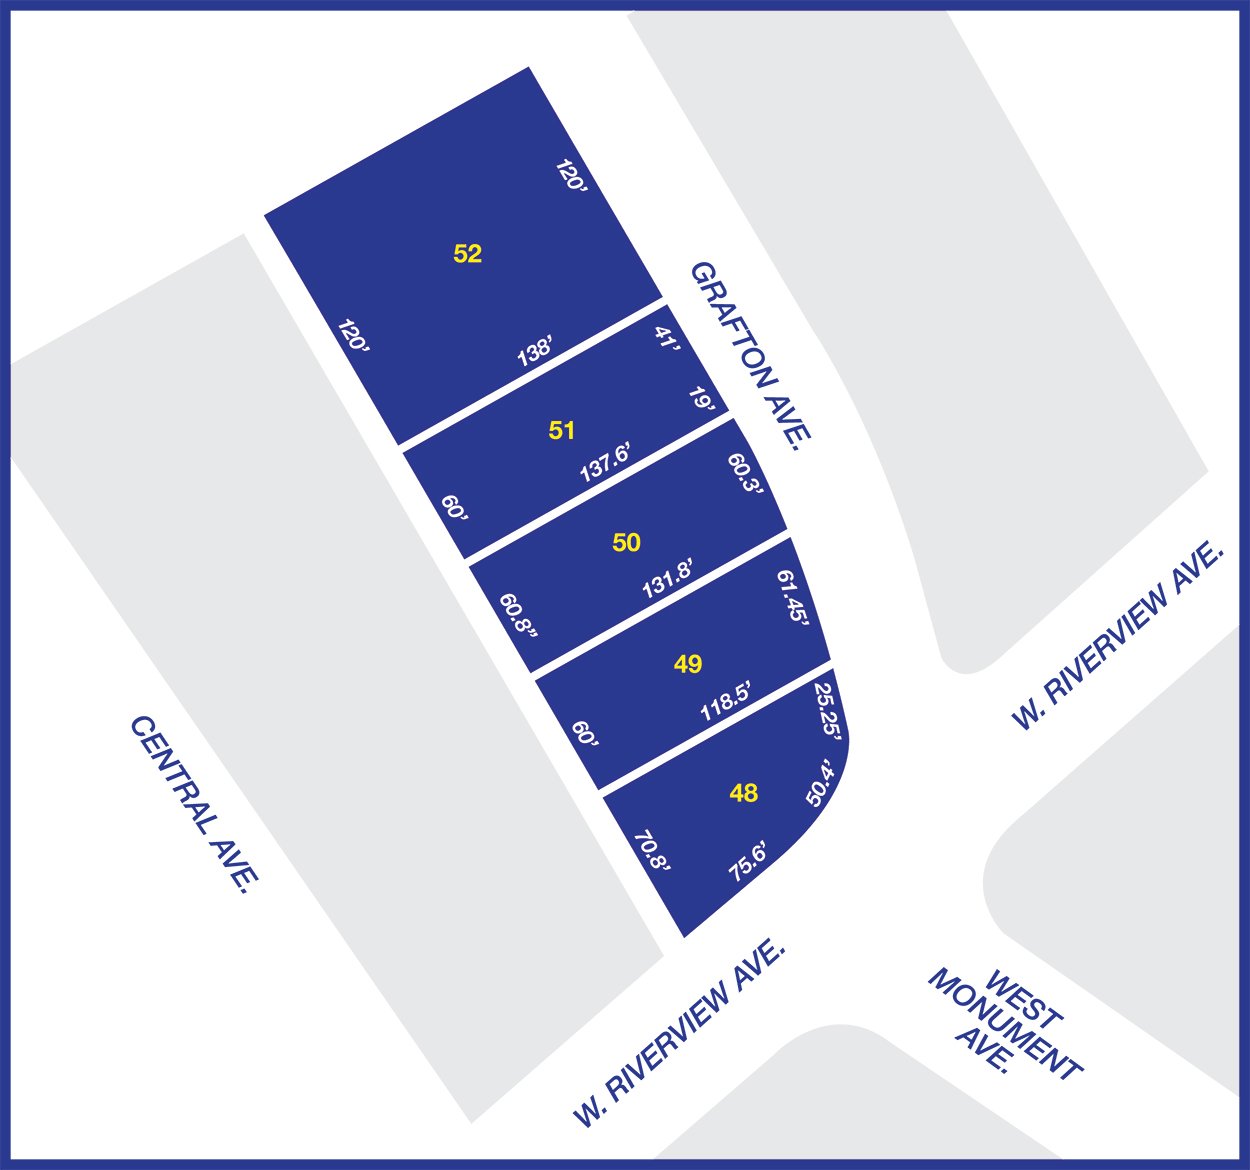 Site dimensions map